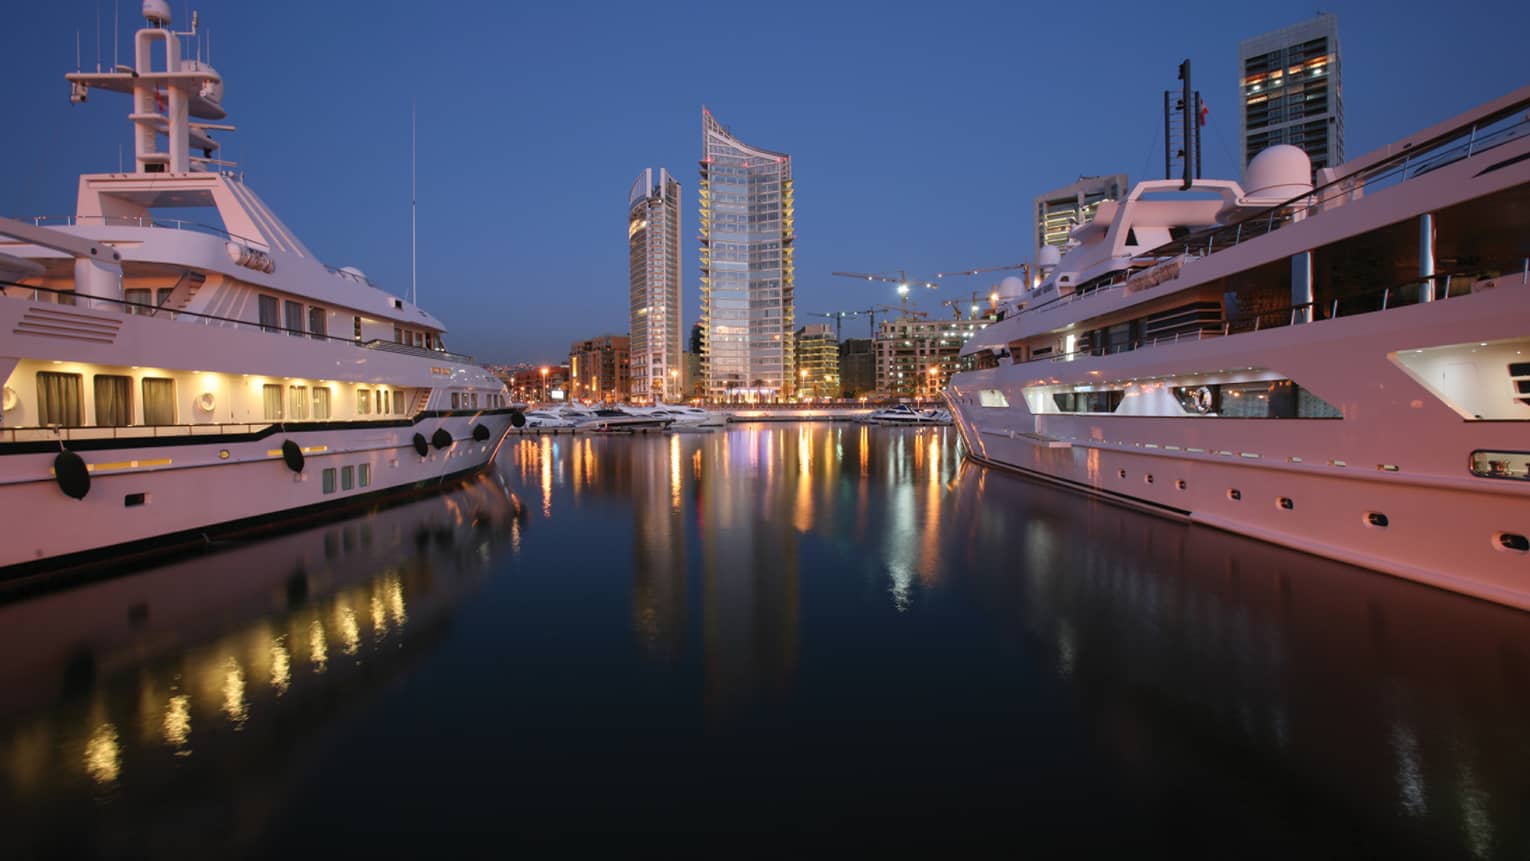 High rise buildings with lights at night reflected on water between two white yachts